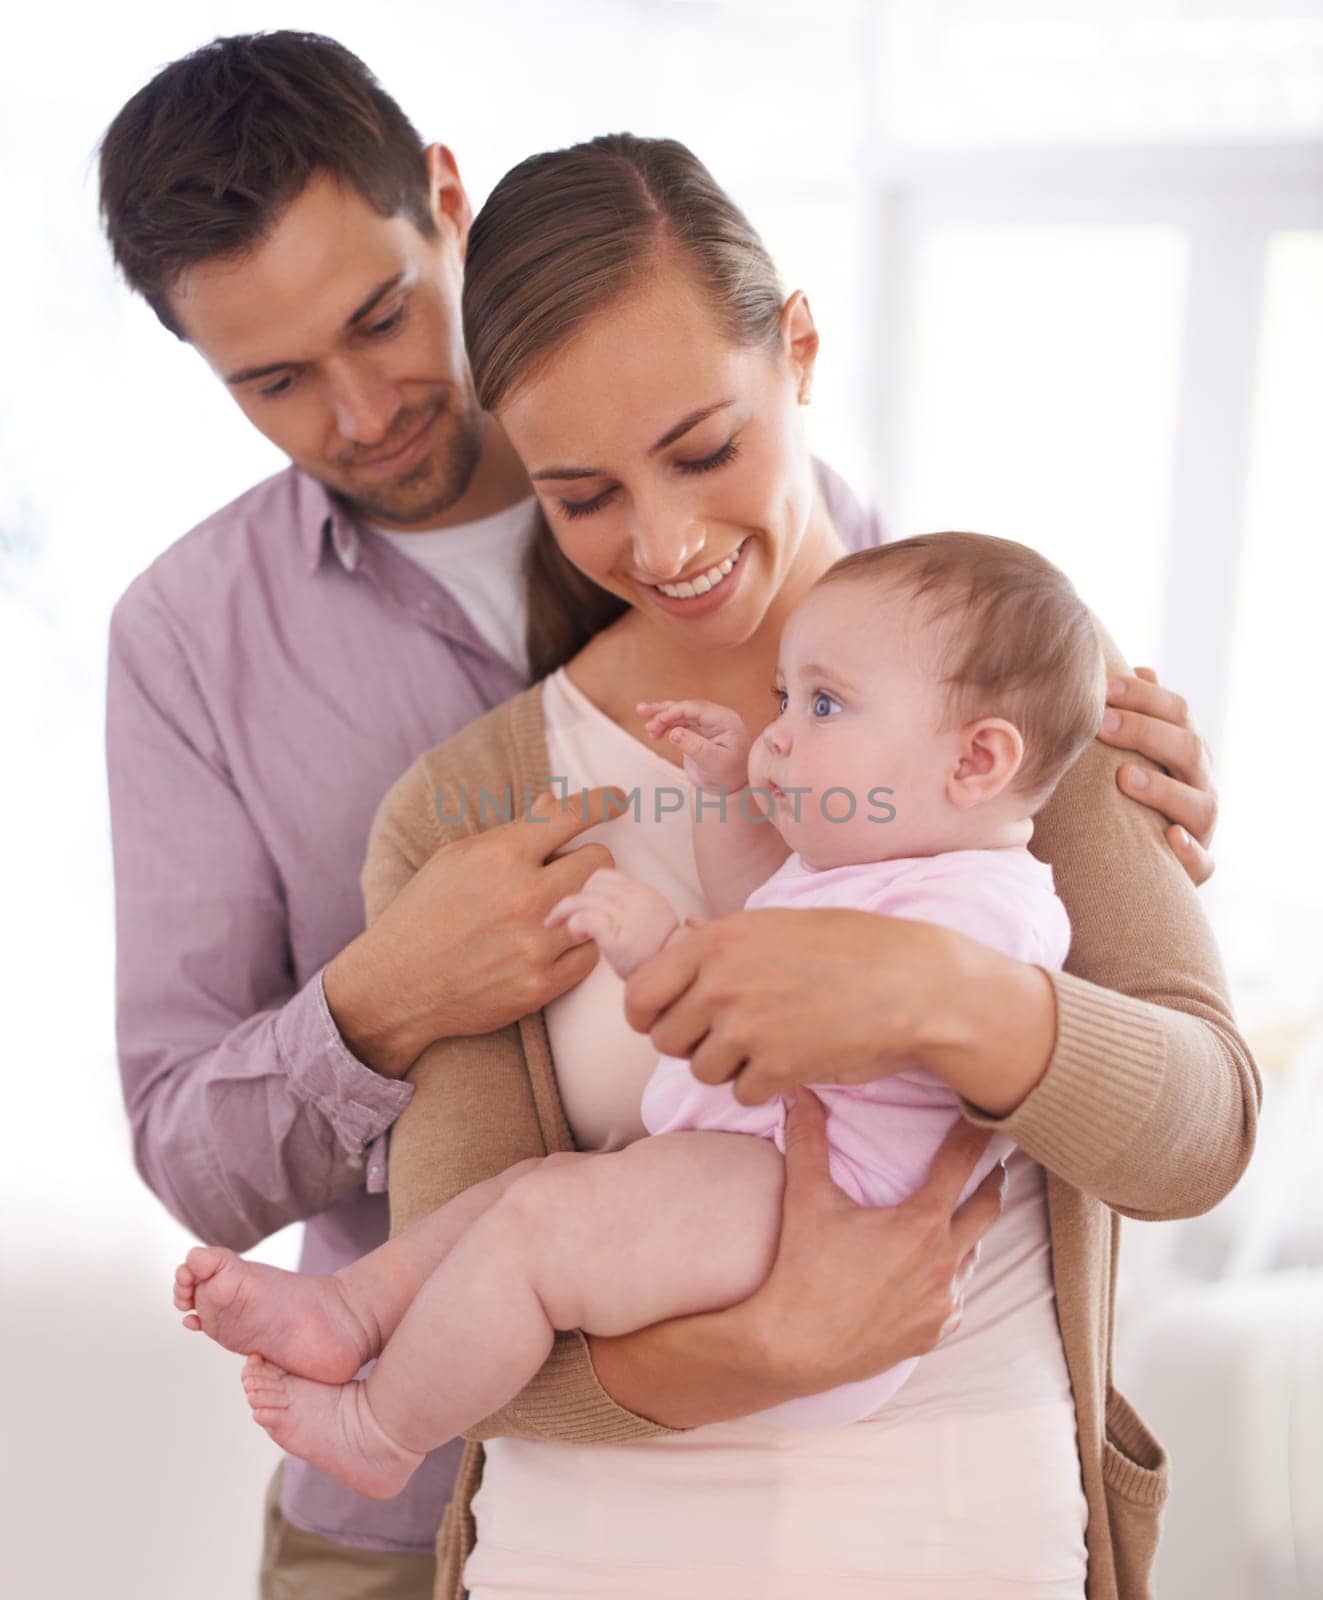 No stronger bond than parent and child. a father holding his little baby girl in his arms